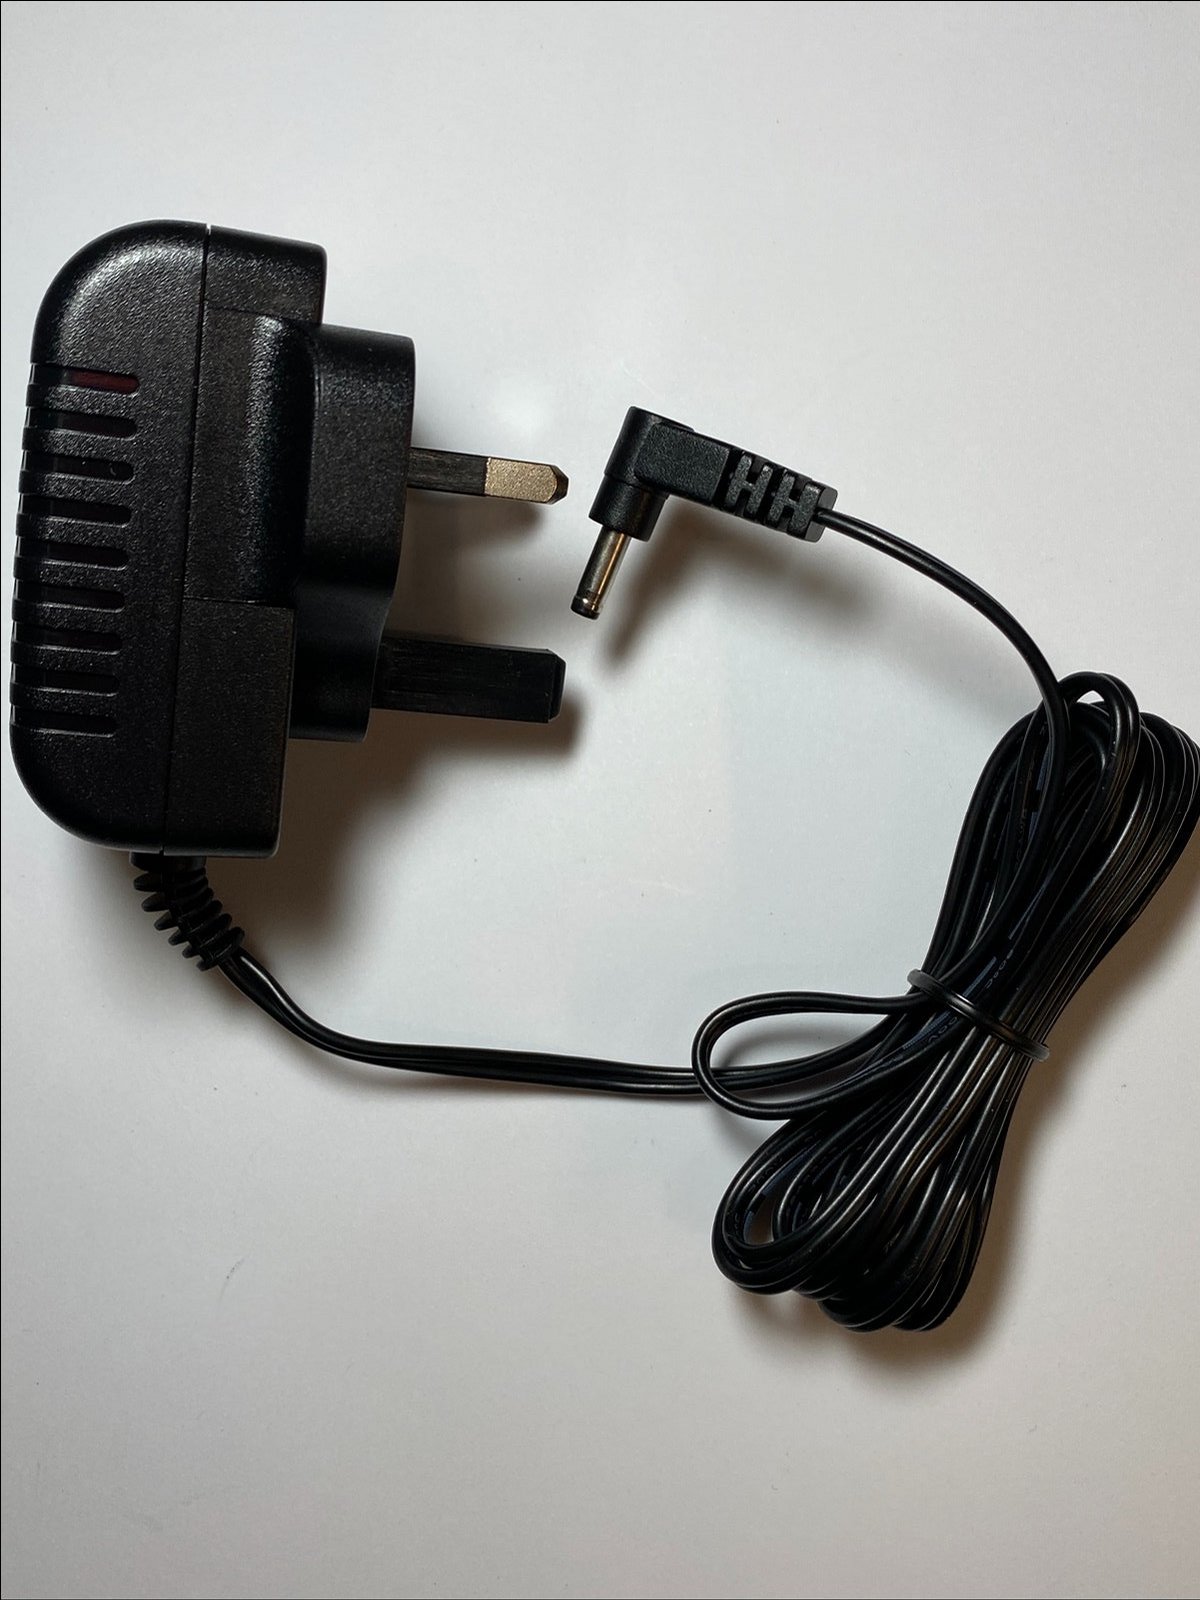 Replacement for 6V 1500mA AC Adaptor 4 BUSH Stereo DAB/FM Radio 1507 553/5927 Type: Power Adapter Max. Output Power: - Click Image to Close